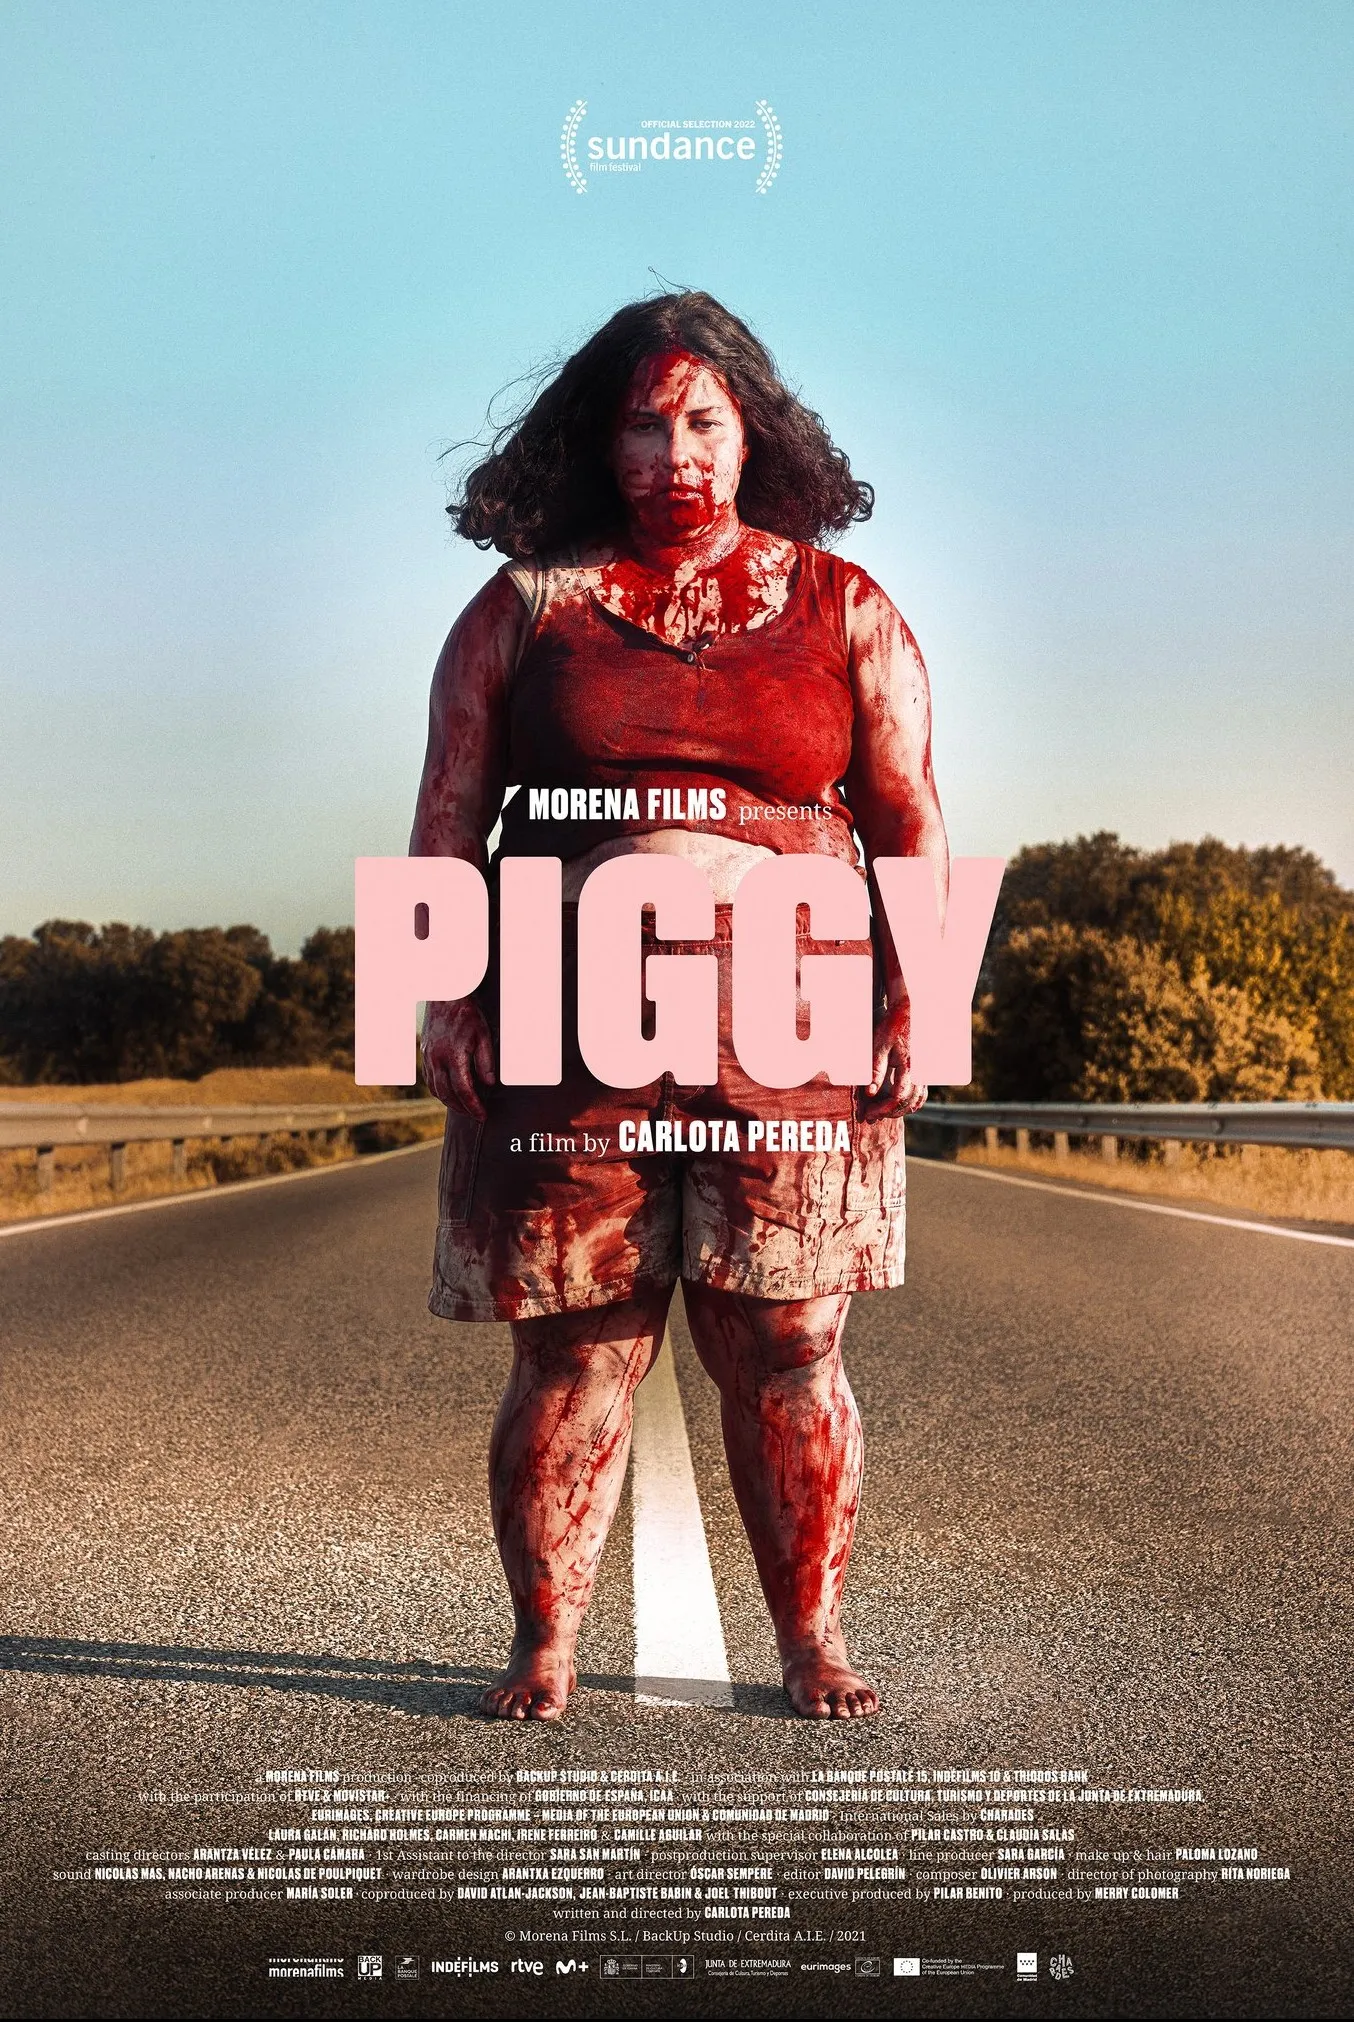 Spanish Thriller "Piggy" Releases US Official Trailer and Poster | FMV6